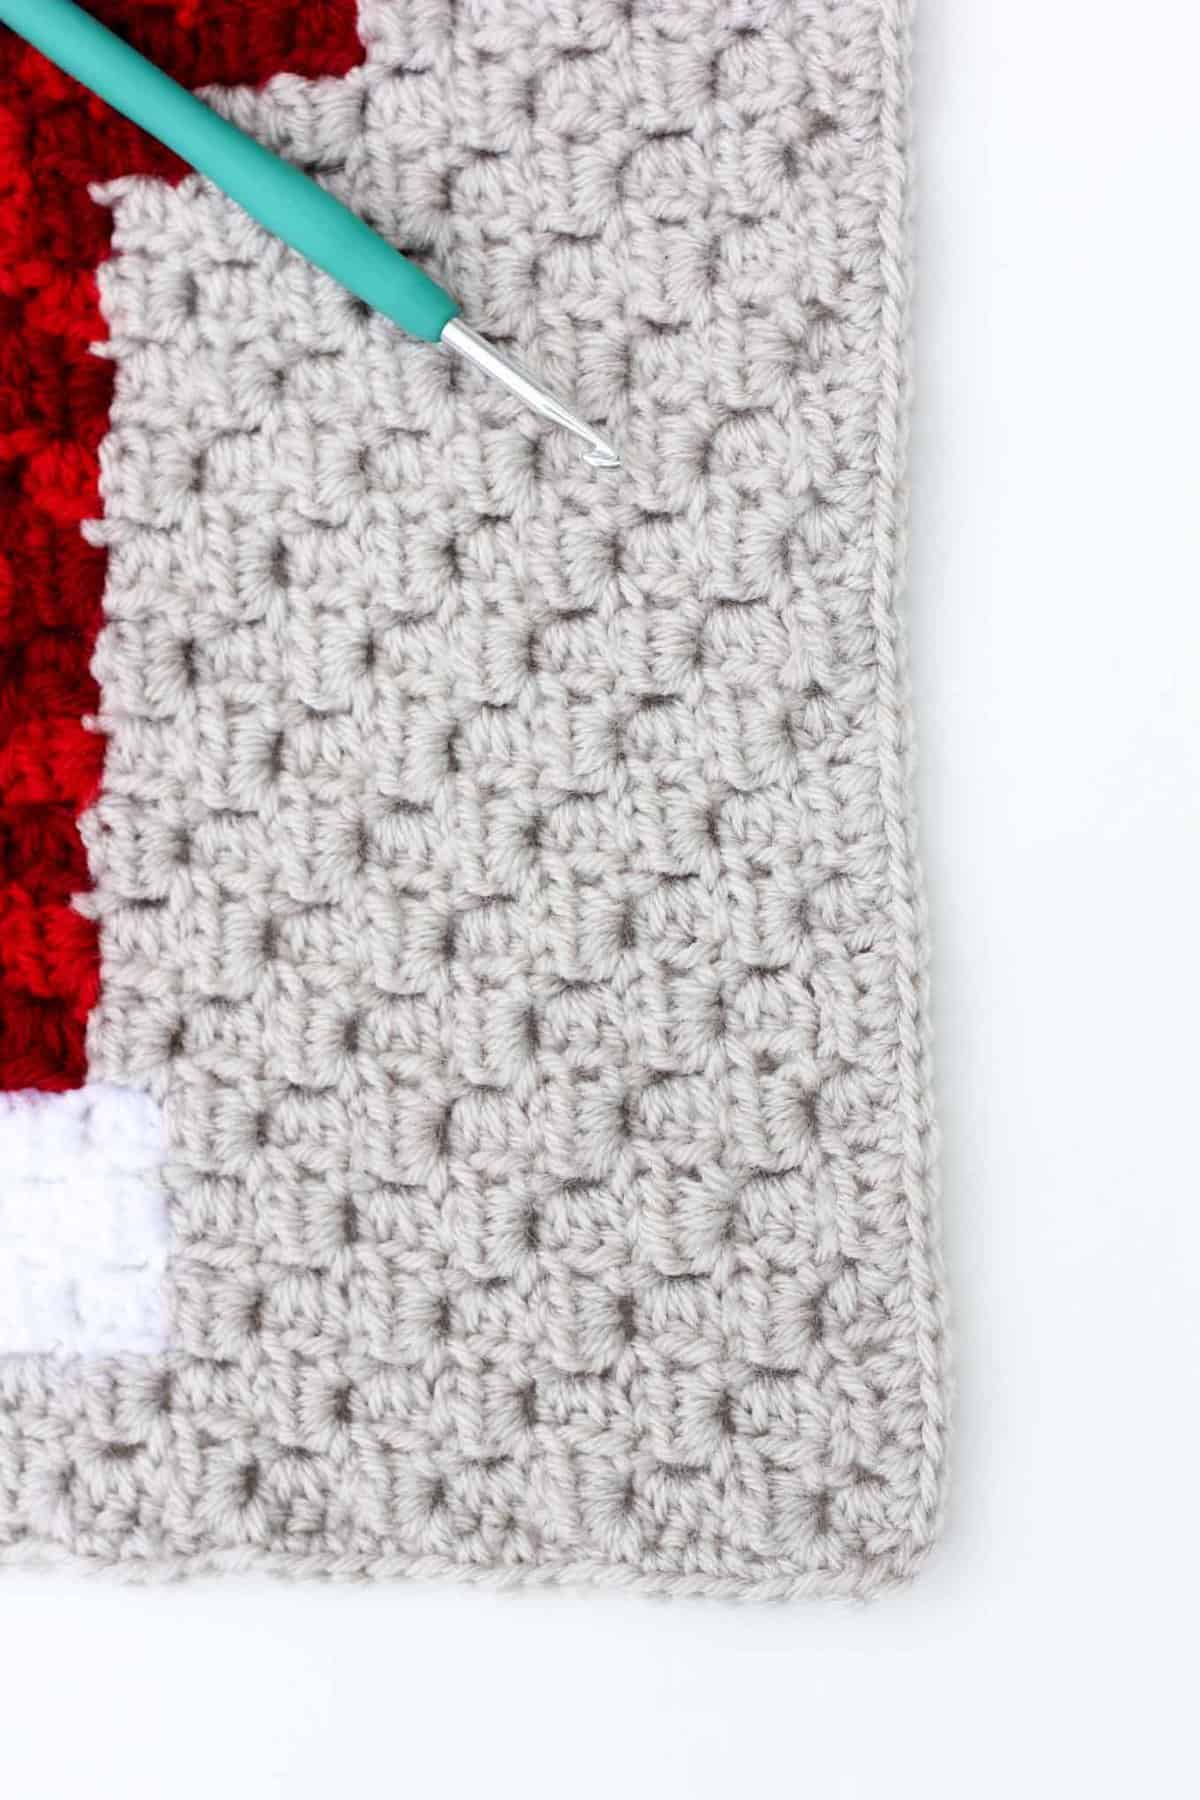 You've worked diligently on creating corner-to-corner crochet squares and now you're wondering what to do with them, right? This tutorial will show you how to add a border to a C2C afghan block so that it's ready to be sewn together into a graphgan.